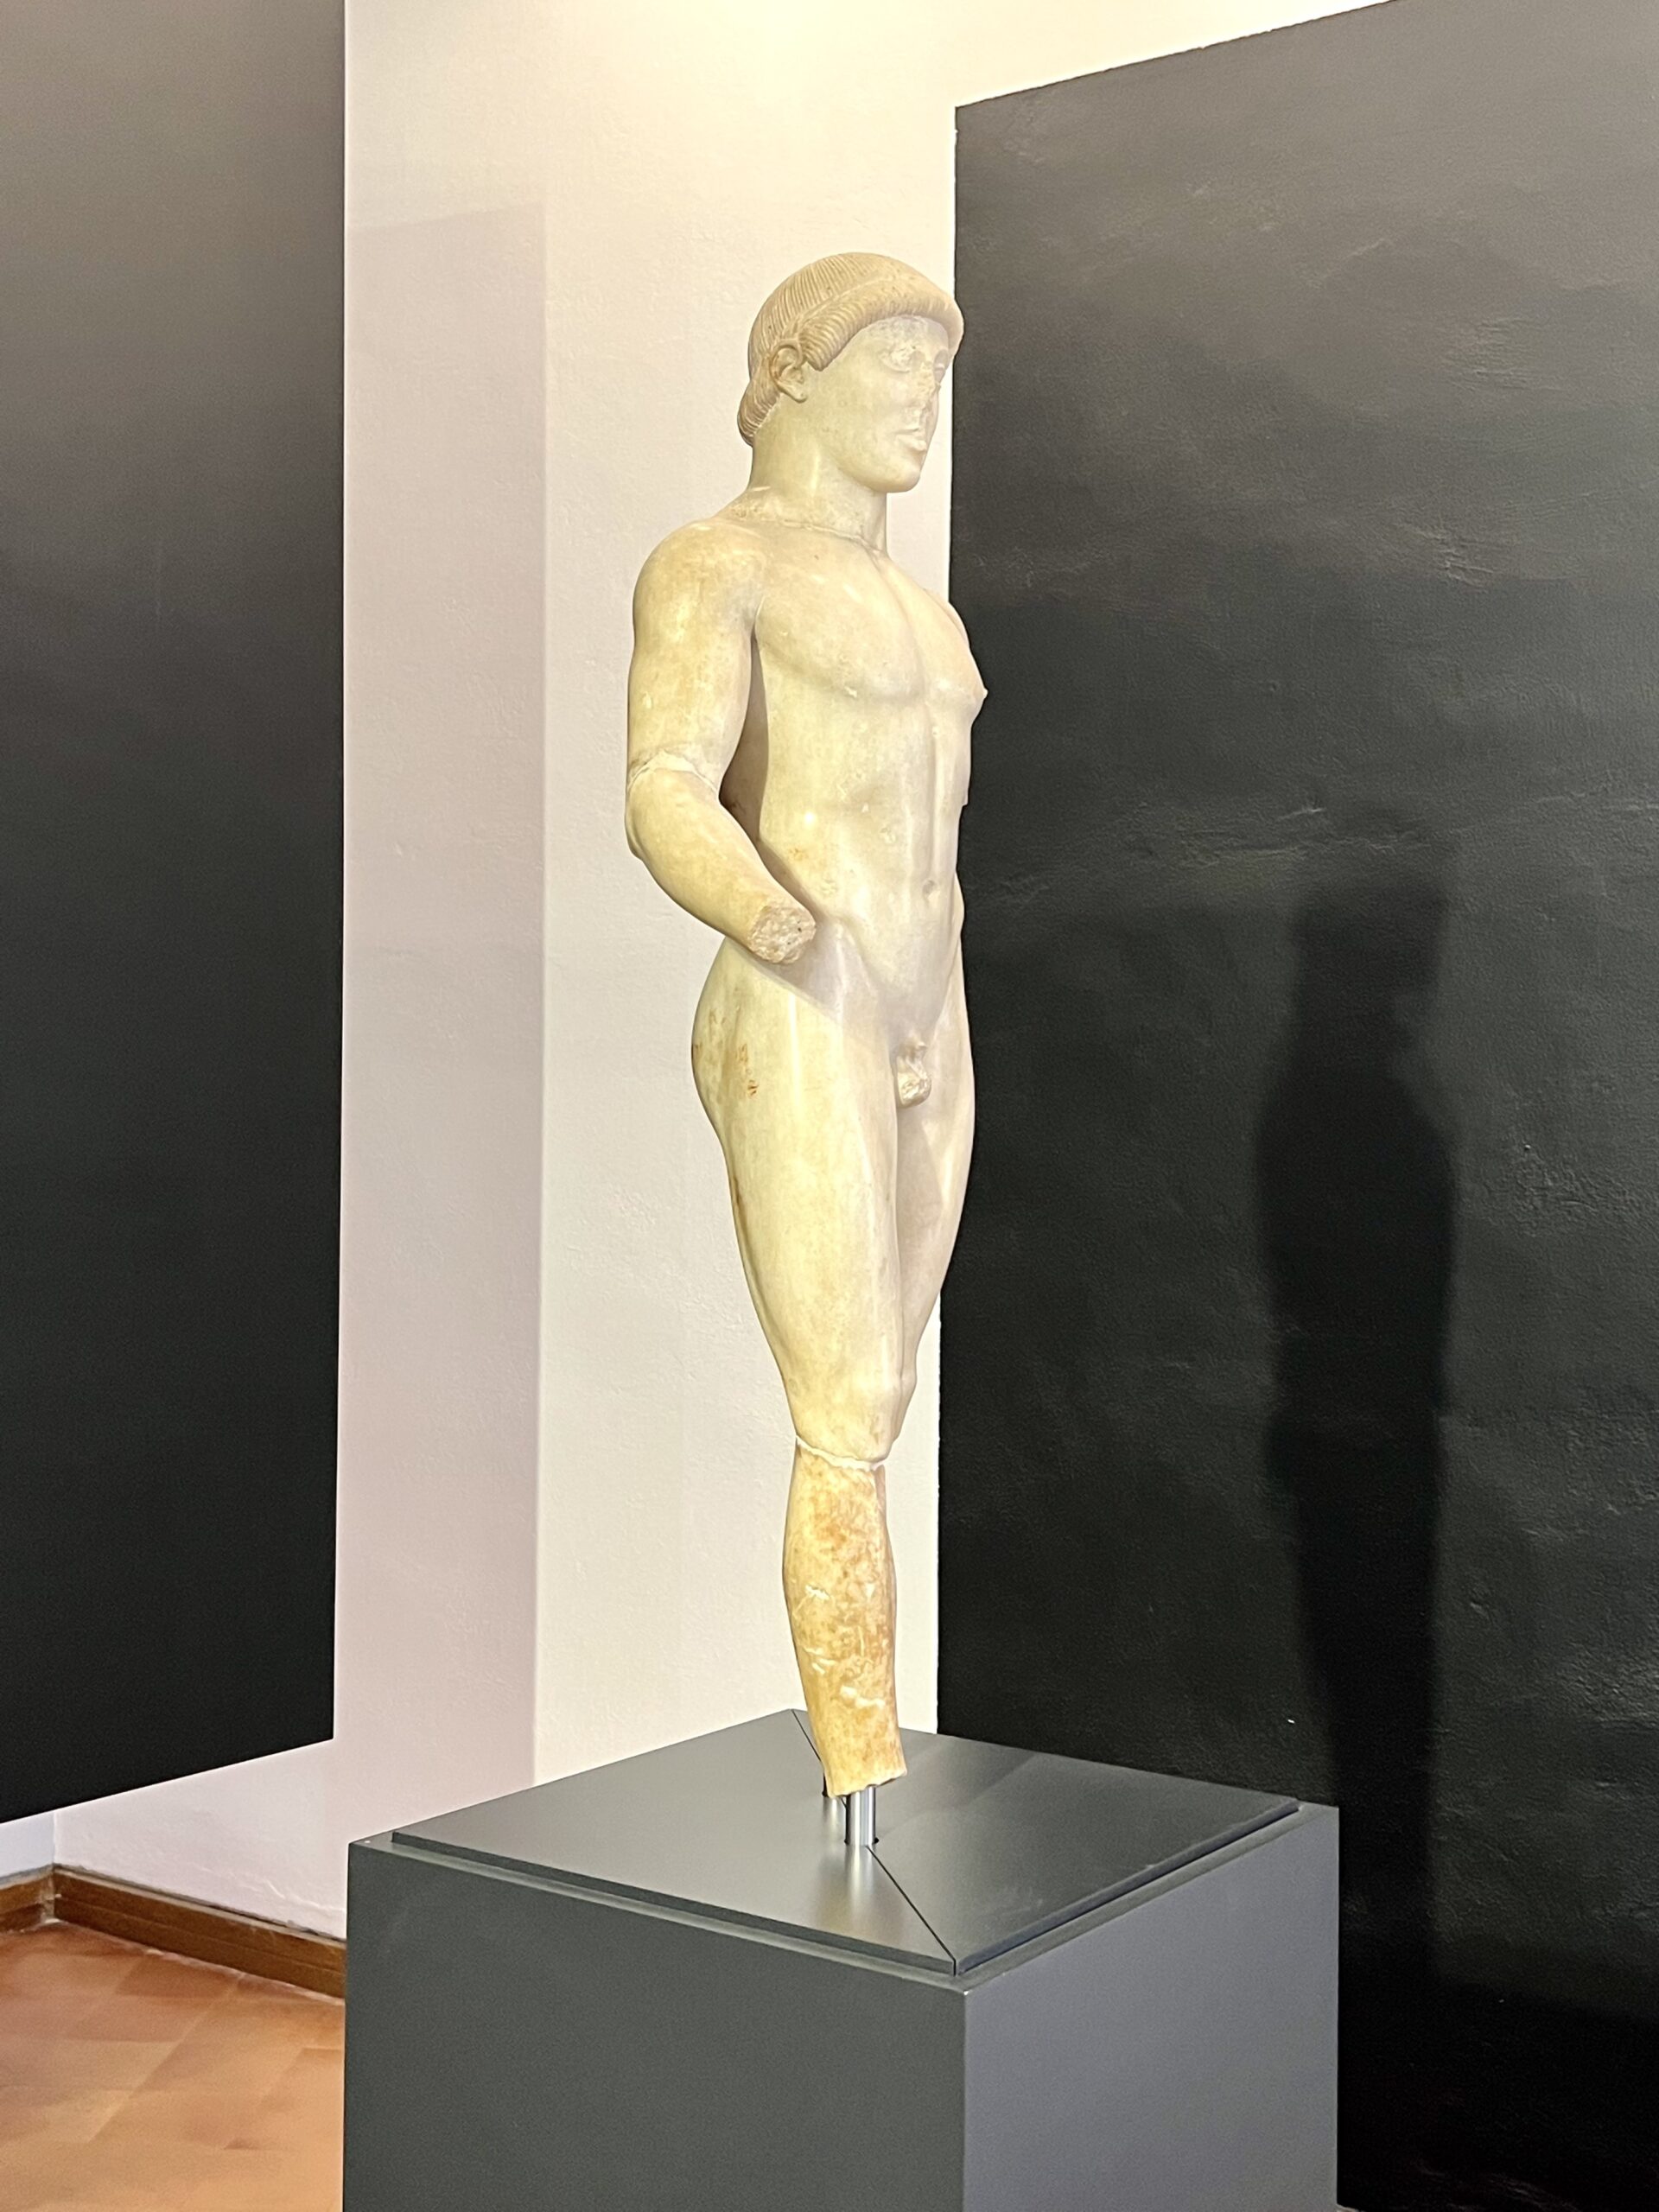 Kouros, also known as The Agrigento Youth